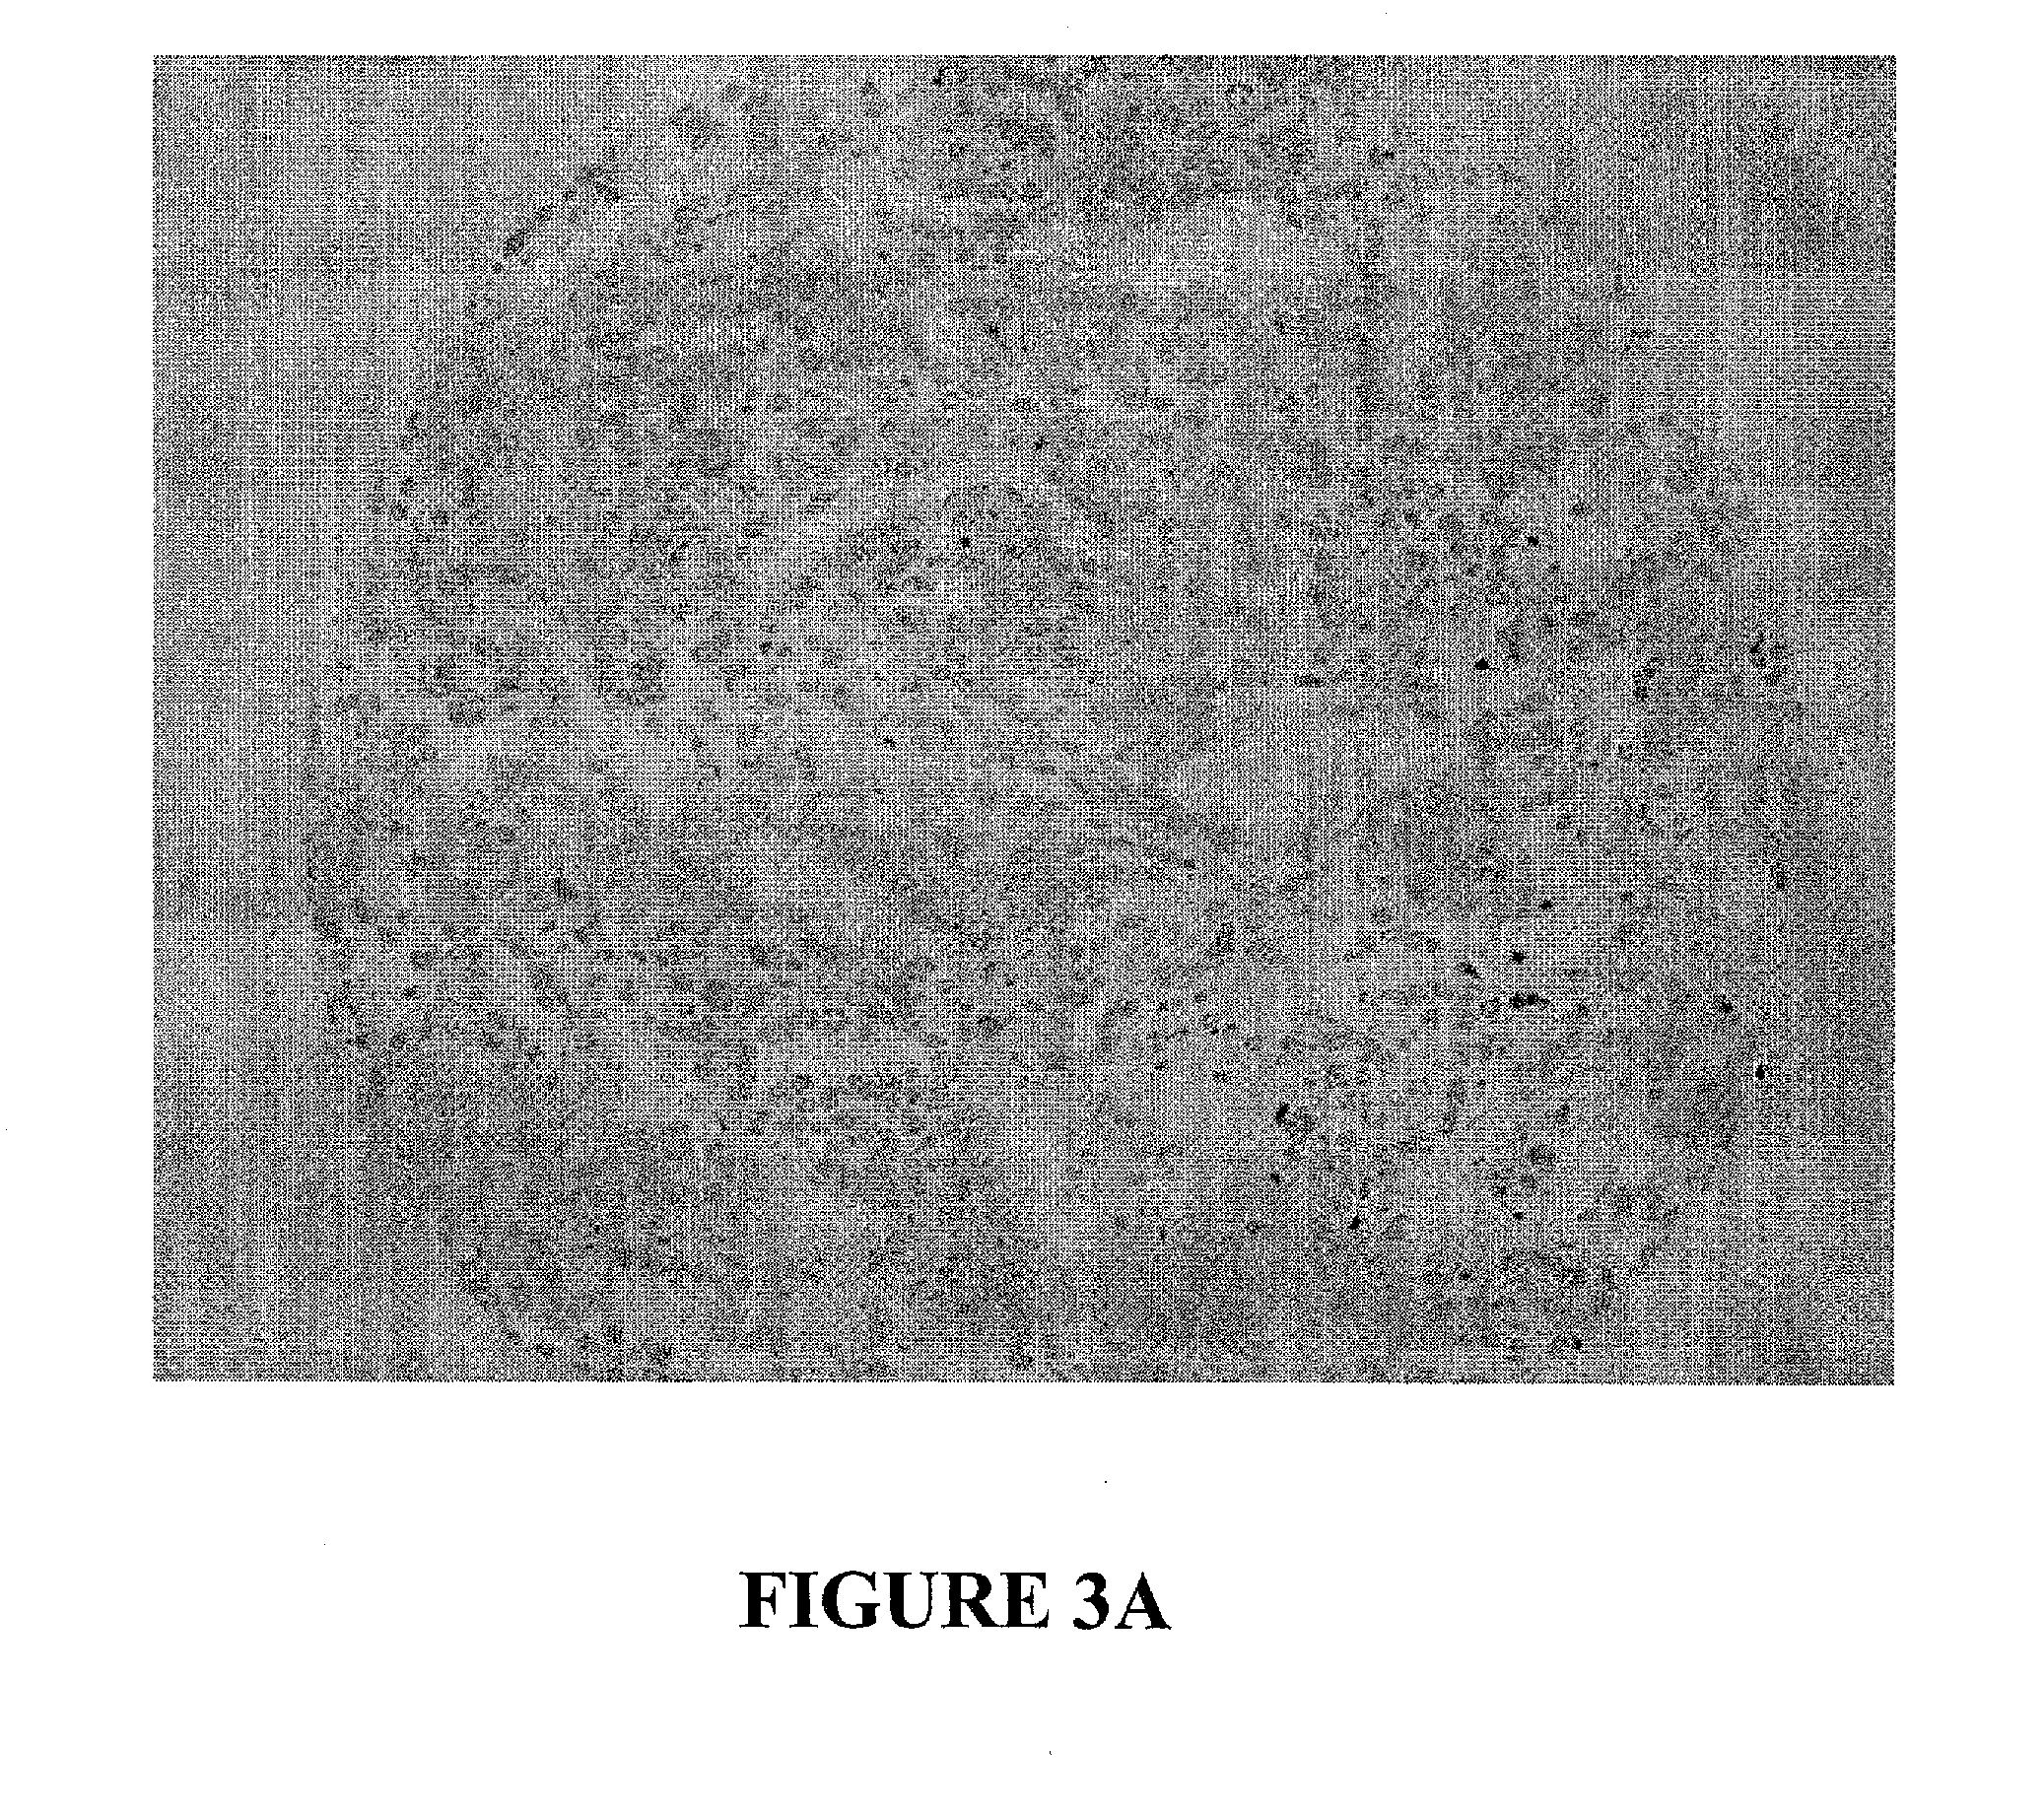 Antibodies to muc16 and methods of use thereof